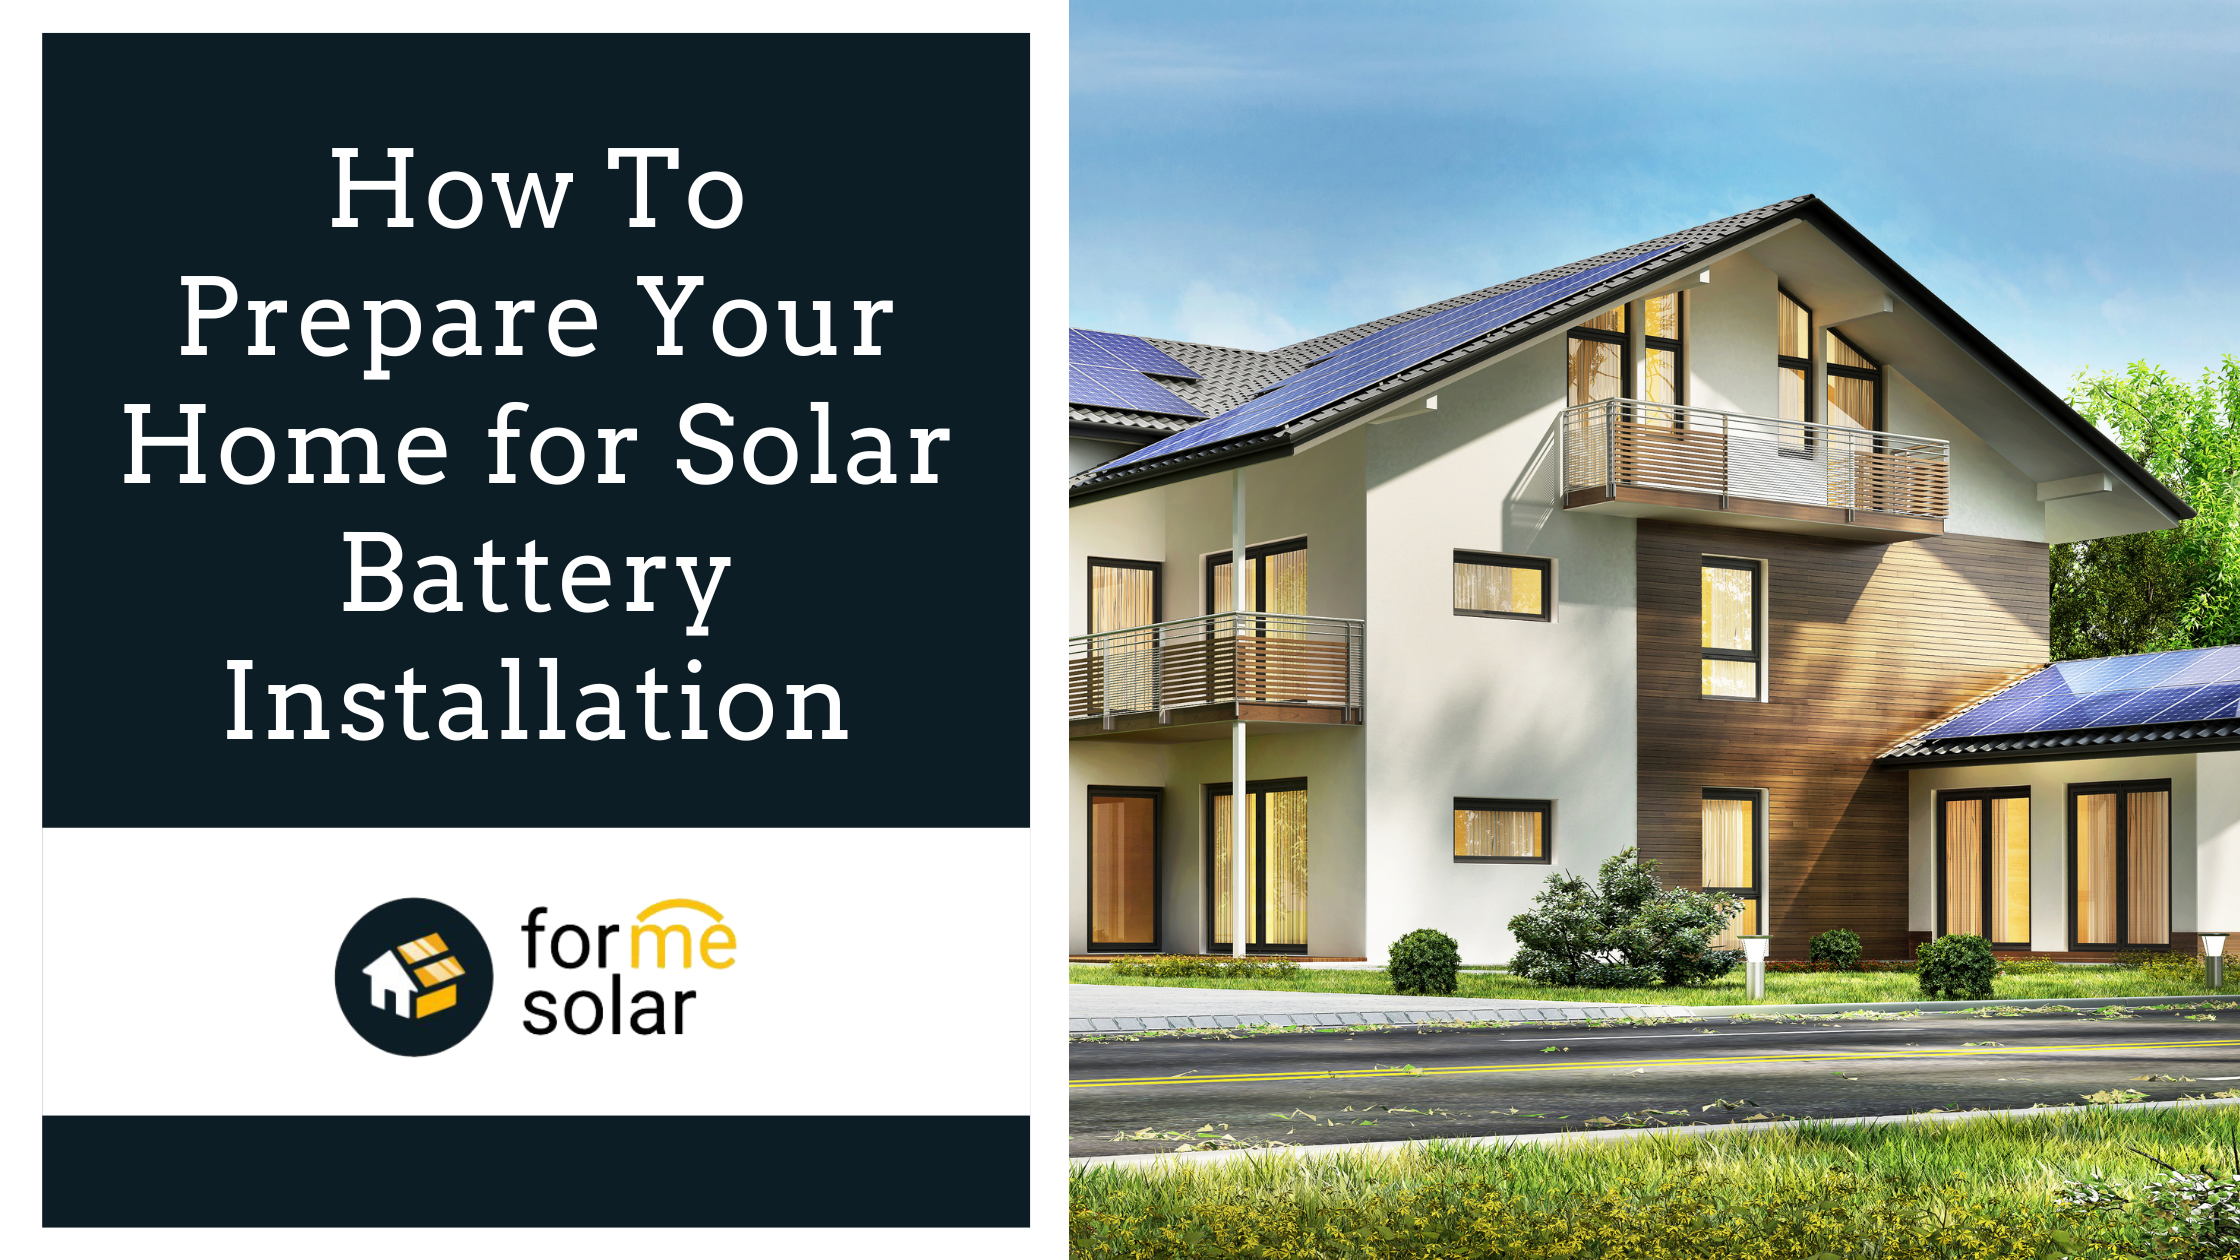 The Role of Ethics in AI-Driven Home solar battery Platforms